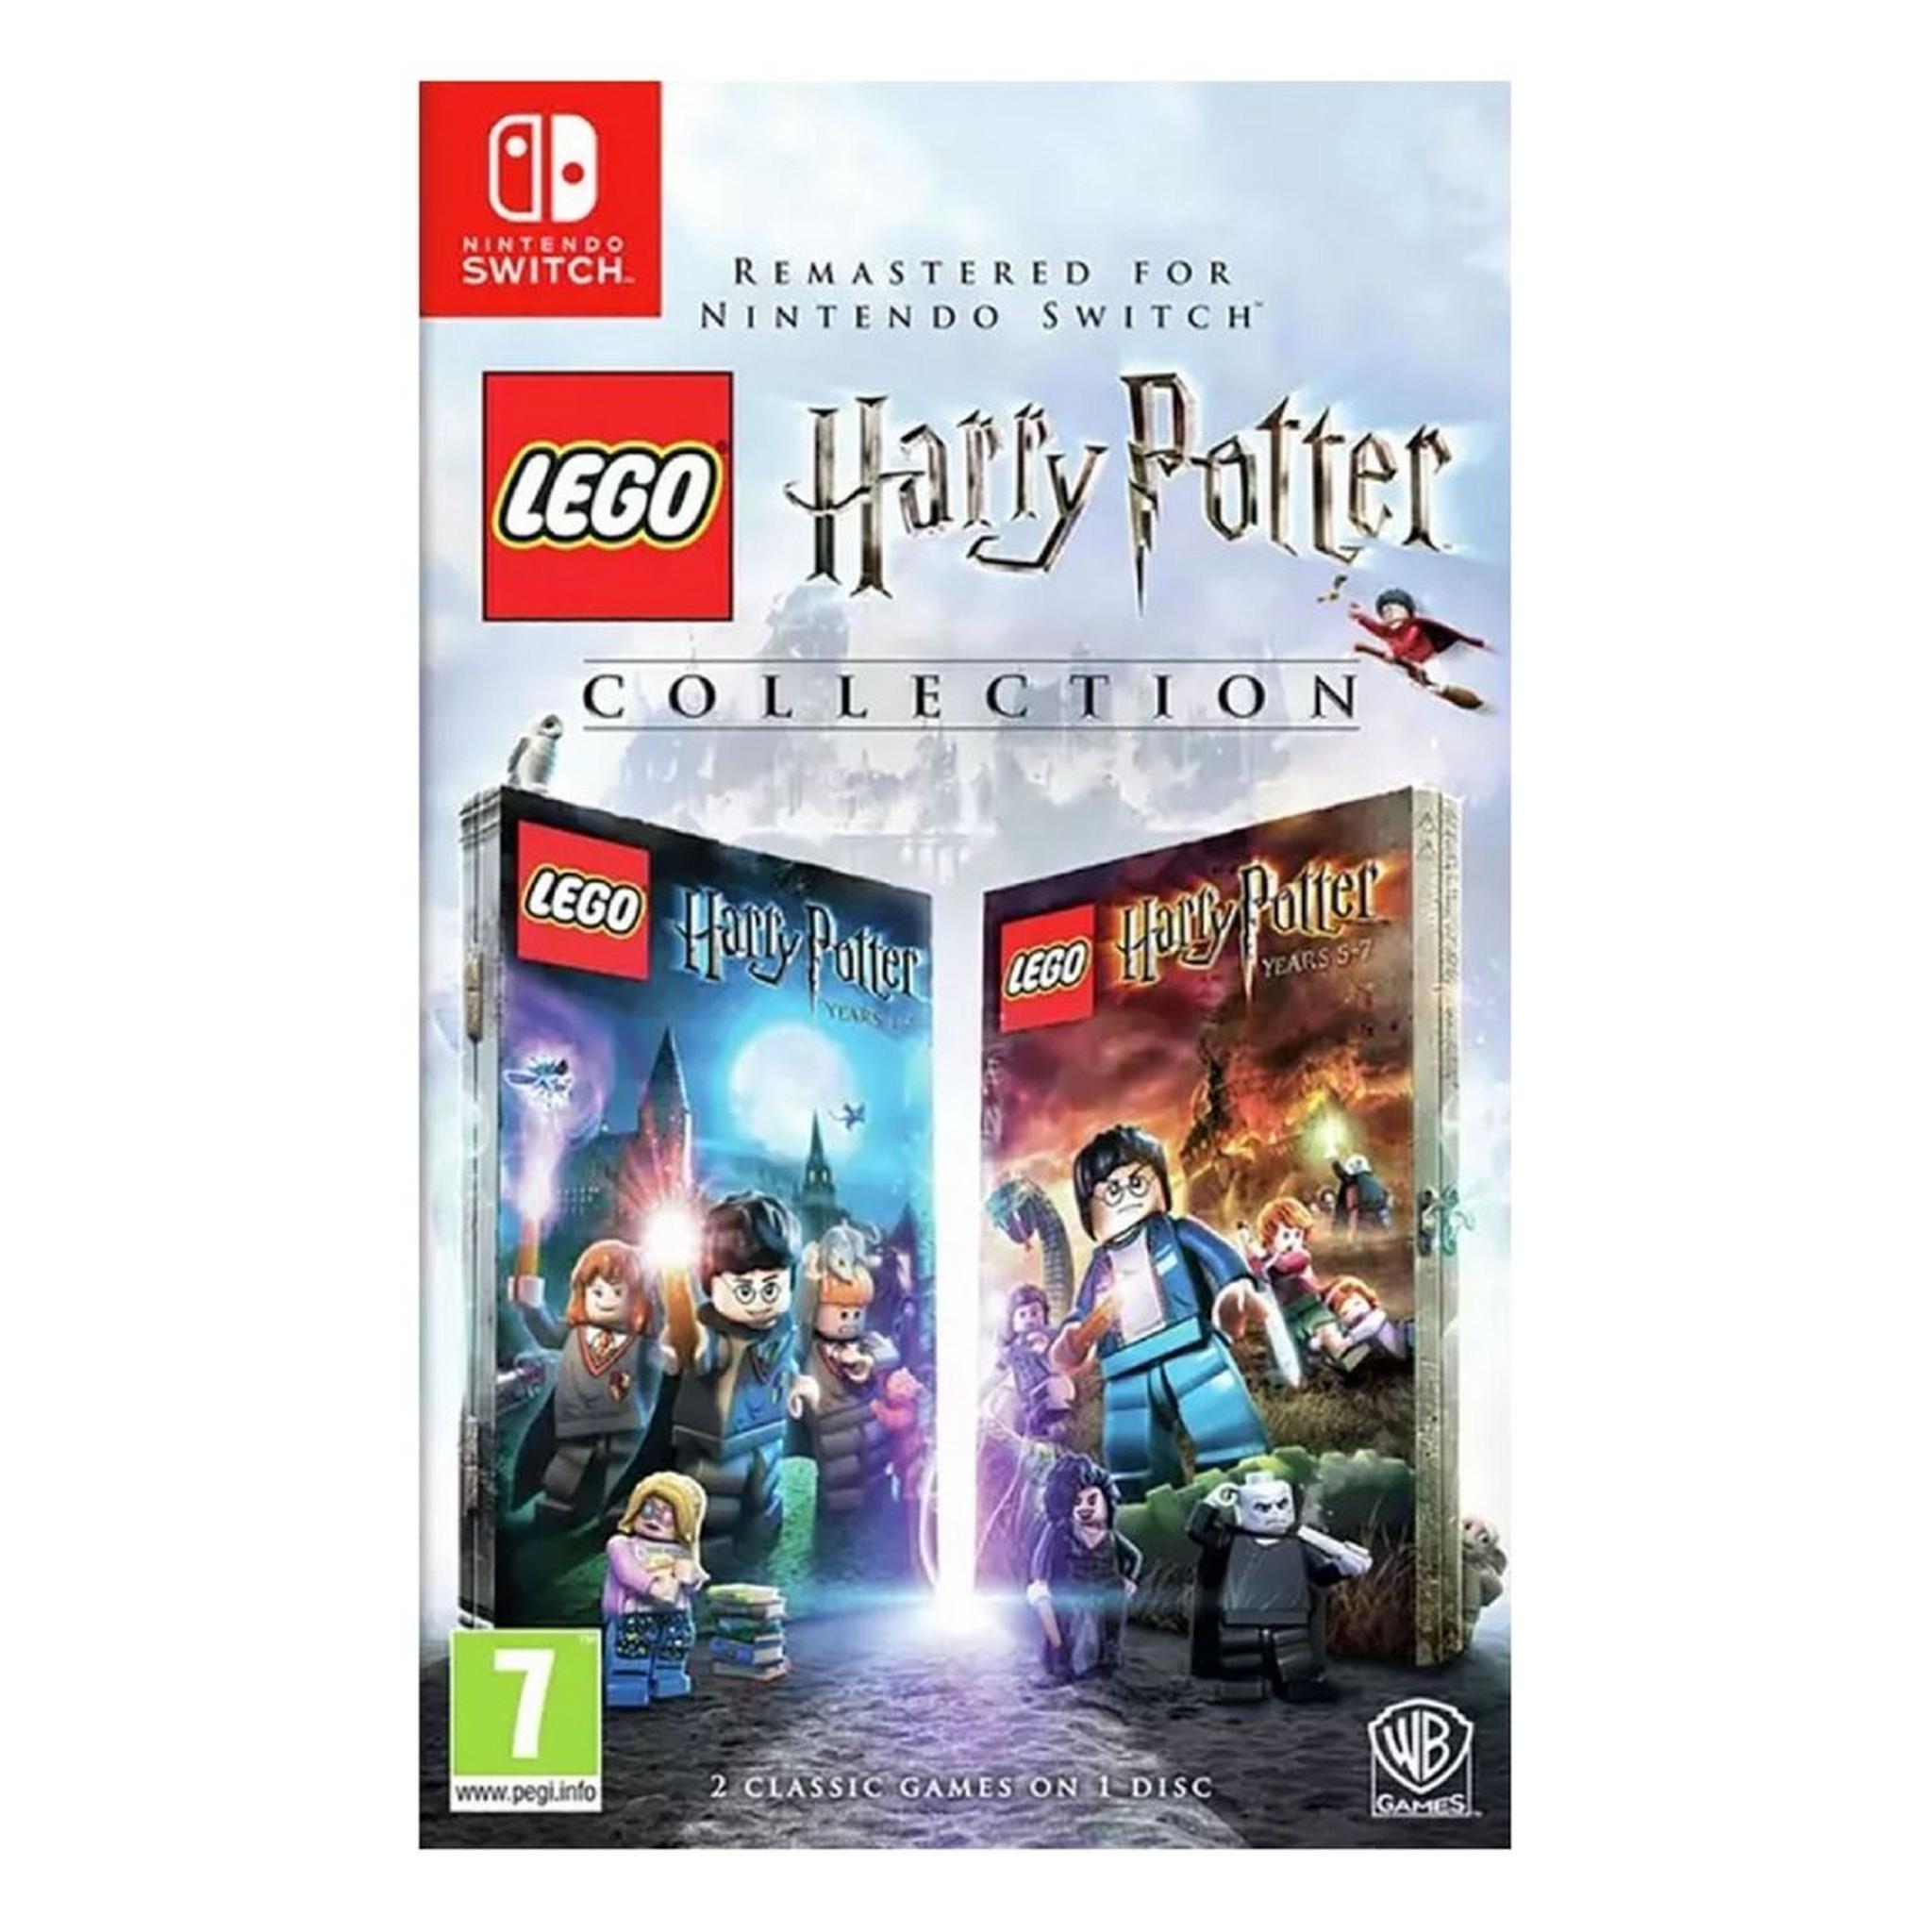 Lego Harry Potter Collection - Nintendo Switch Game